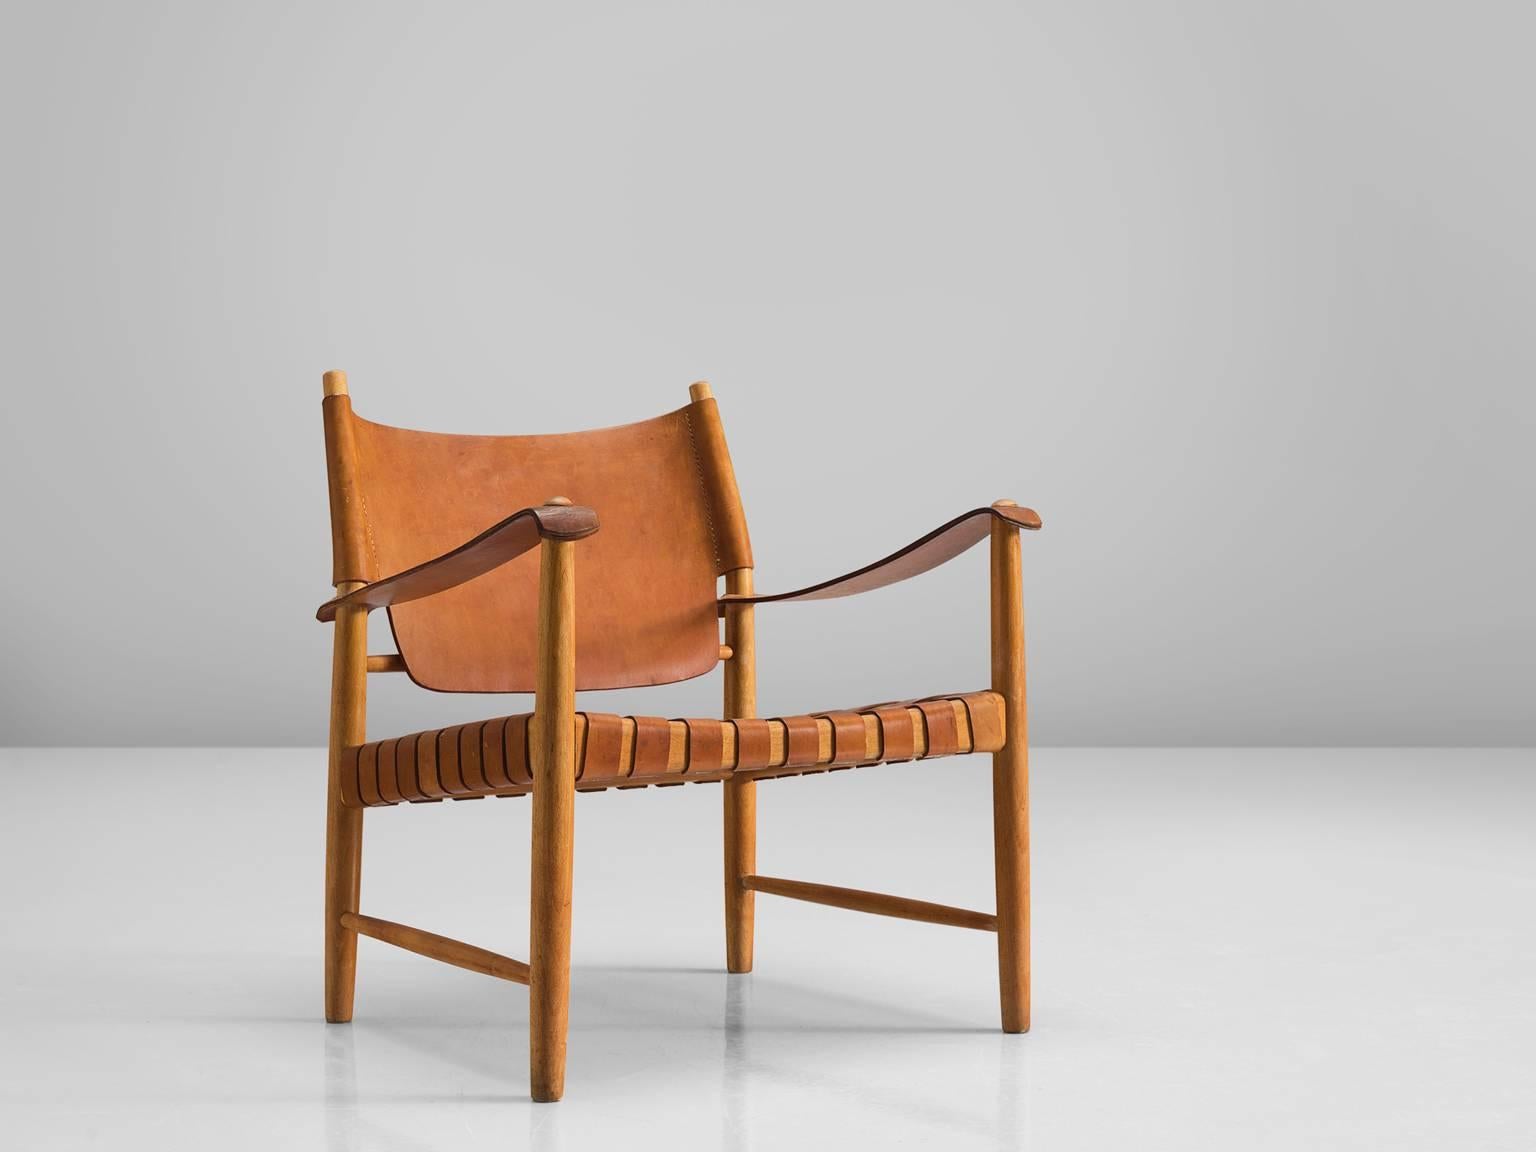 Safari chair, leather, beech, Denmark, 1950s

This elegant safari chair features wonderful patinated leather on both seat and back. The patina on this chair creates a vibrant look and the straps in the seat form a thick, well-constructed yet